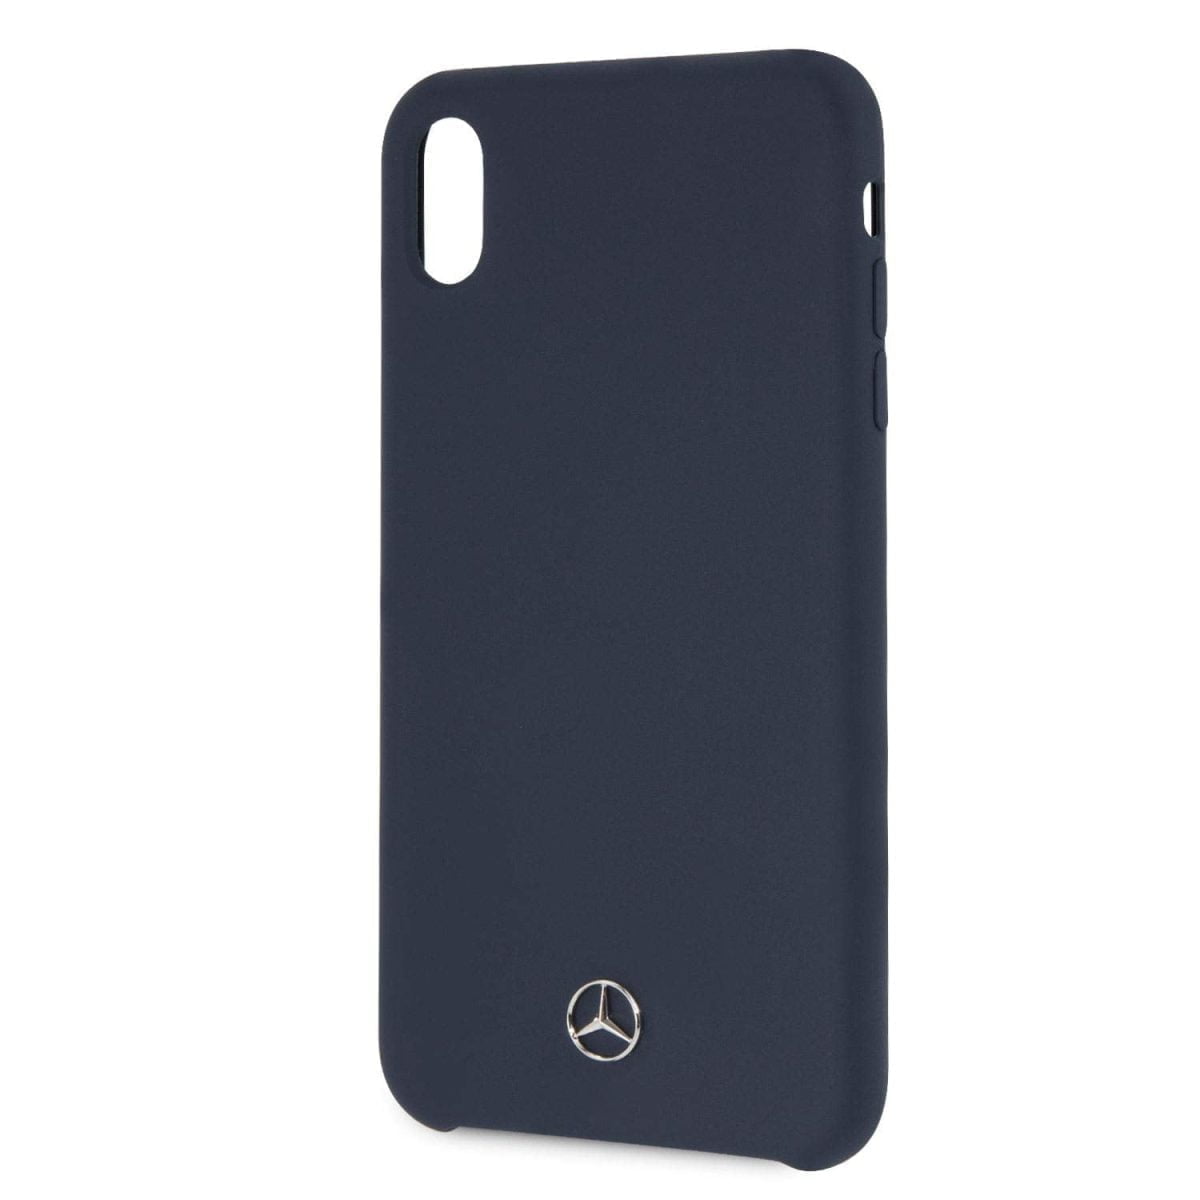 Mercedes Benz Iphone Xs Max Liquid Silicon Silcon Case With Microfiber Lining Navy 03 This Hard Silicone Soft Case With A Sculpted Metallic Mercedes Benz Logo For A 3D Effect Gives You A Classic And Elegant Appeal To Your Handheld Device It Has Easy Accessibility For All Ports And Buttons. Case Compatible With Wireless Chargers. Soft Microfiber Interior, Easy To Hold &Amp; Easy Snap-On Design Makes It Fast And Easy To Install Or Take Off In Seconds This Case Provides Both The Ultimate Luxury Experience And Protection From Scratches And Abrasions By Slightly Raised Edges Iphone Silicon Case Iphone Xs Max Liquid Silicon - Silicon Case With Microfiber Lining (Navy Blue) Mercedes-Benz